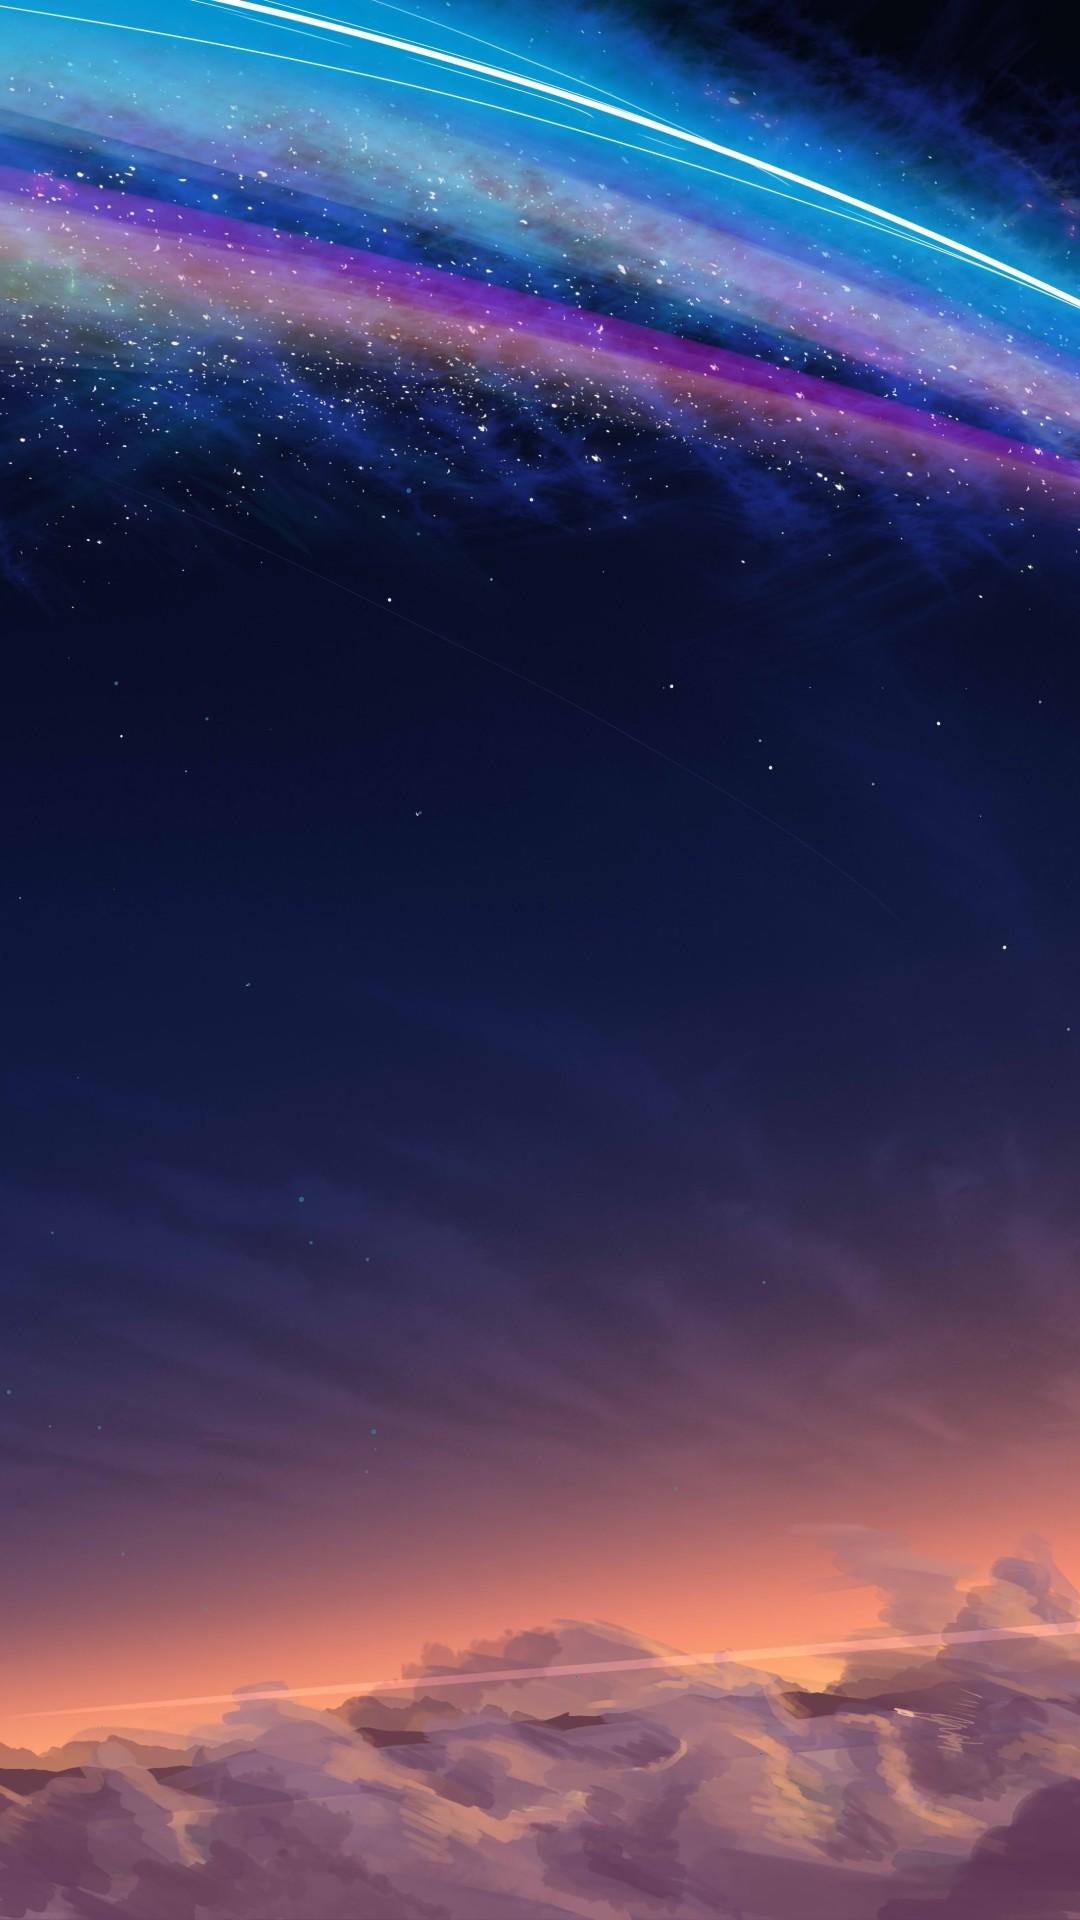 Your Name Wallpaper Handy - Your Name Anime Landscape Wallpapers - Top ...